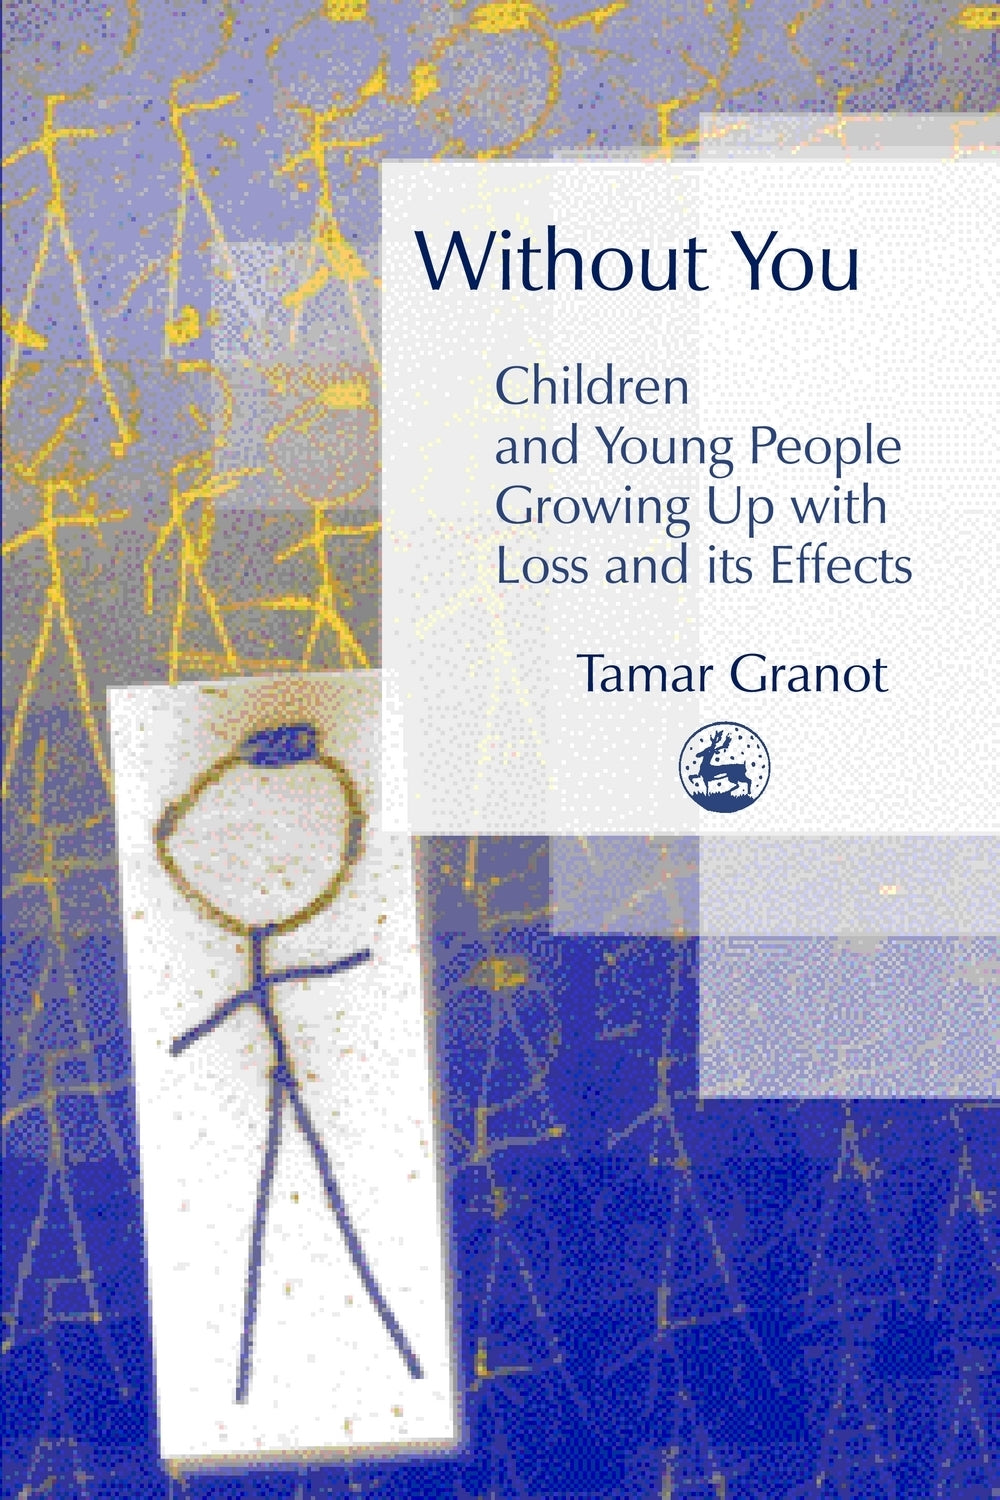 Without You – Children and Young People Growing Up with Loss and its Effects by Tamar Granot